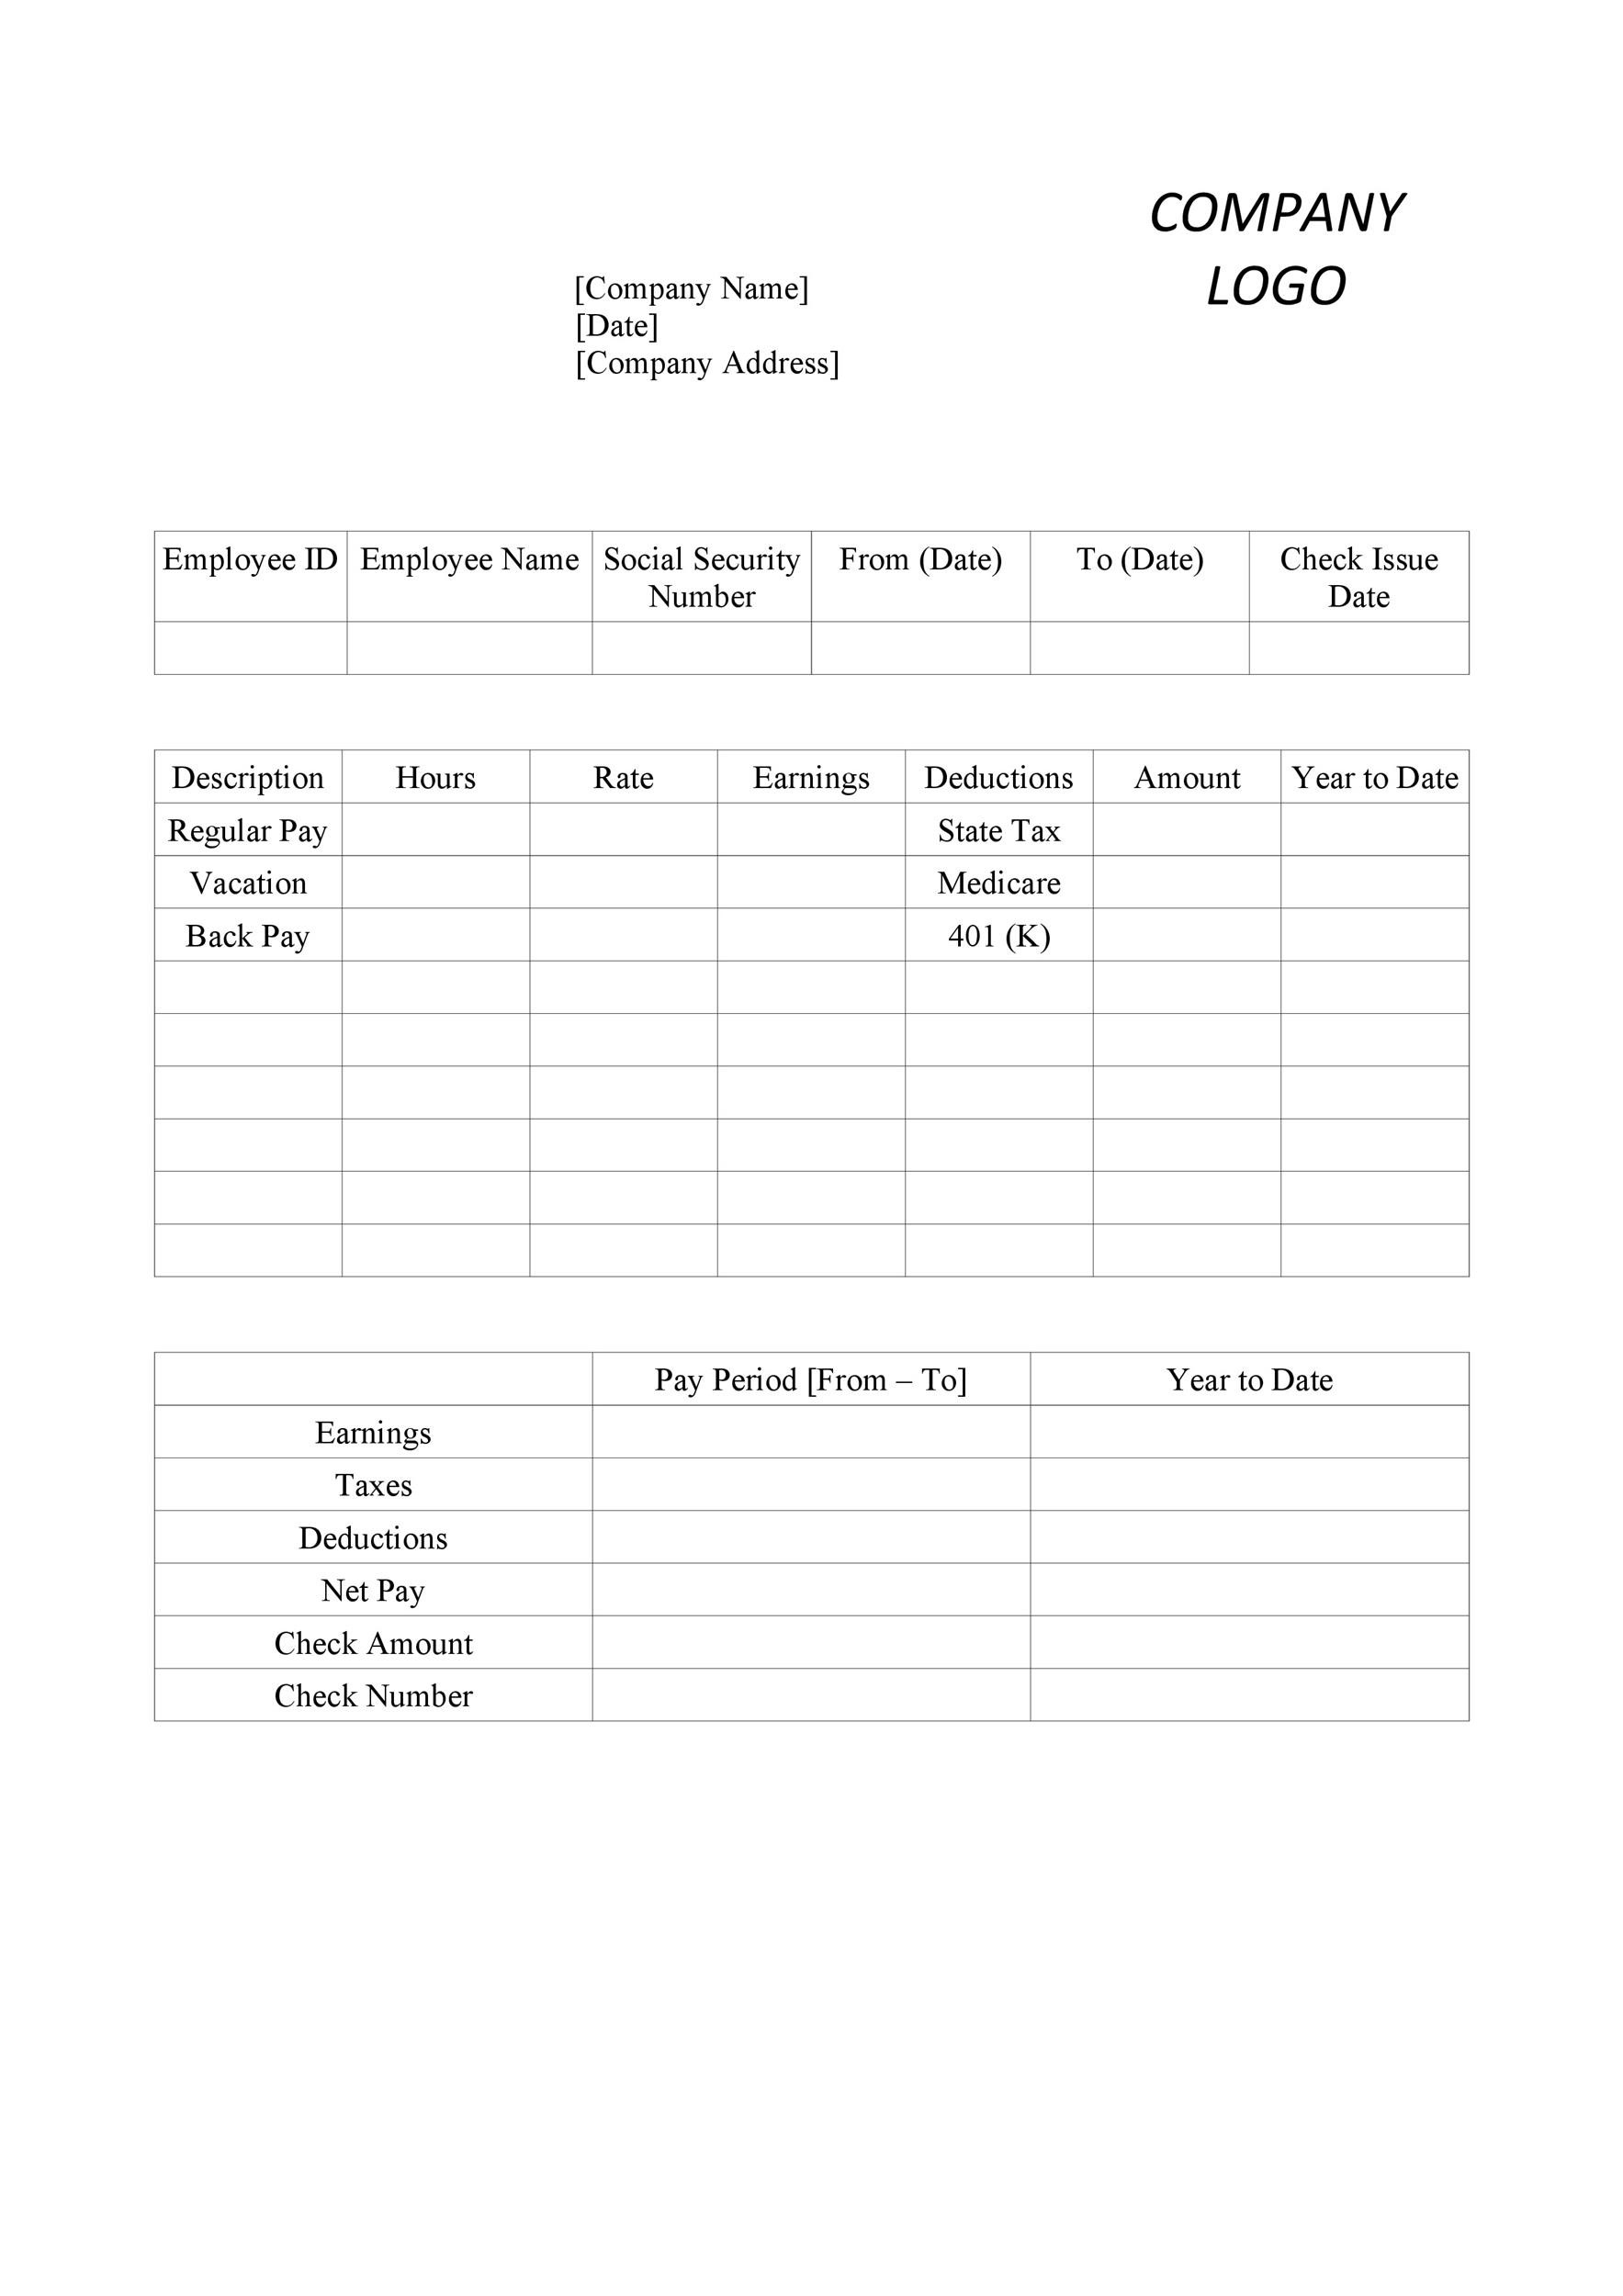 Download Free Paycheck Stub Template In Microsoft Word - Auditblogging intended for Employee Payroll Statement Template